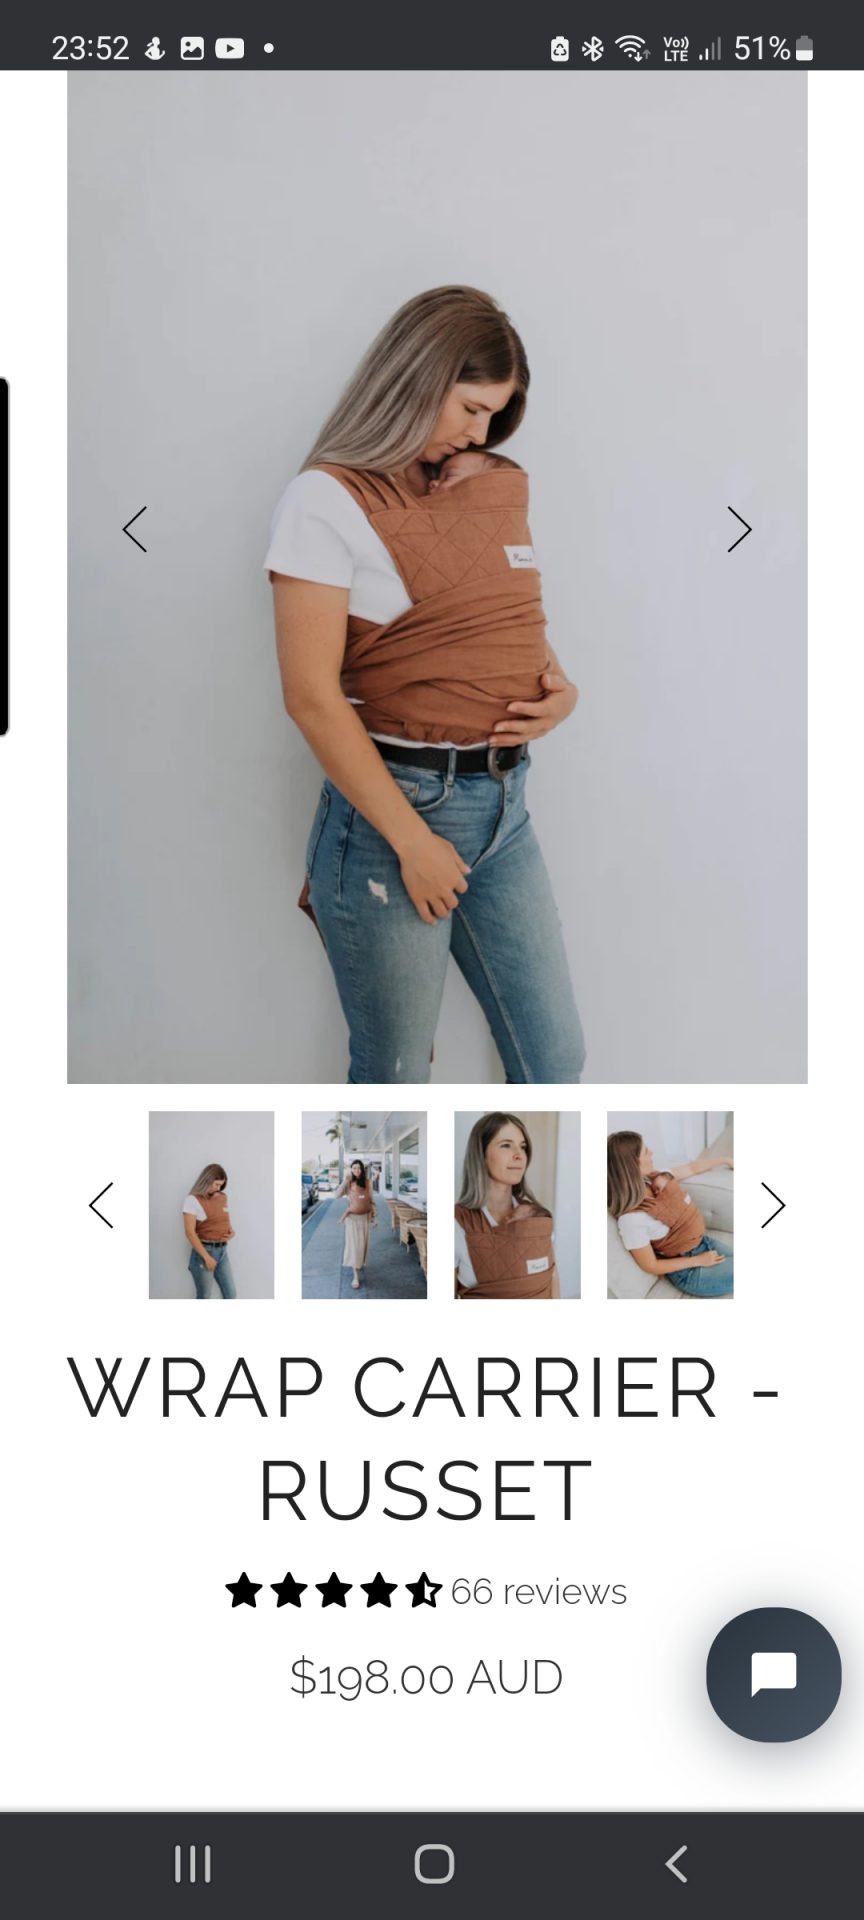 Wrap carrier(s)